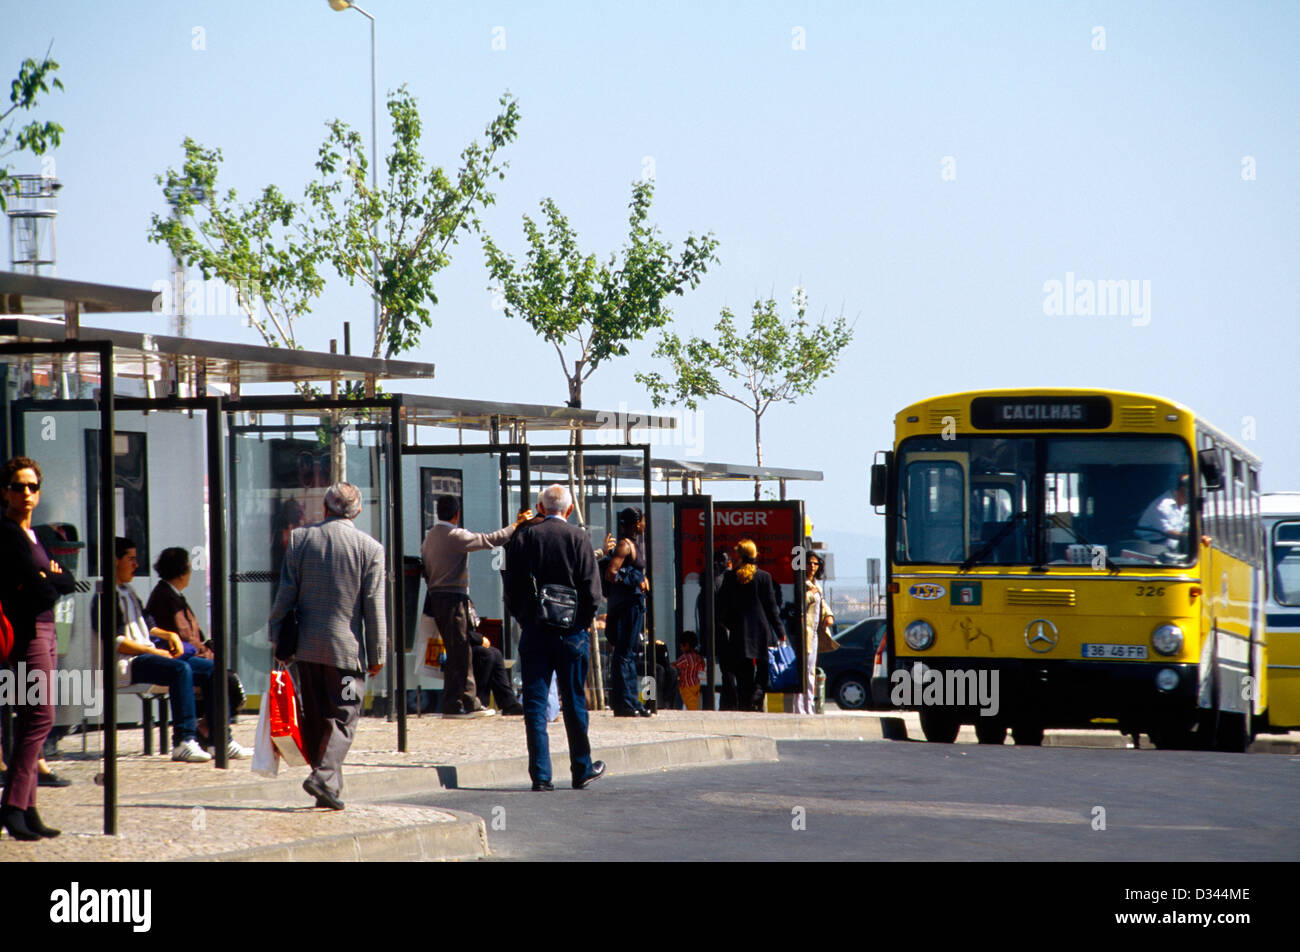 Almada Lisbon Portugal Cacilhas People Waiting For Bus At Bus Stop Stock Photo